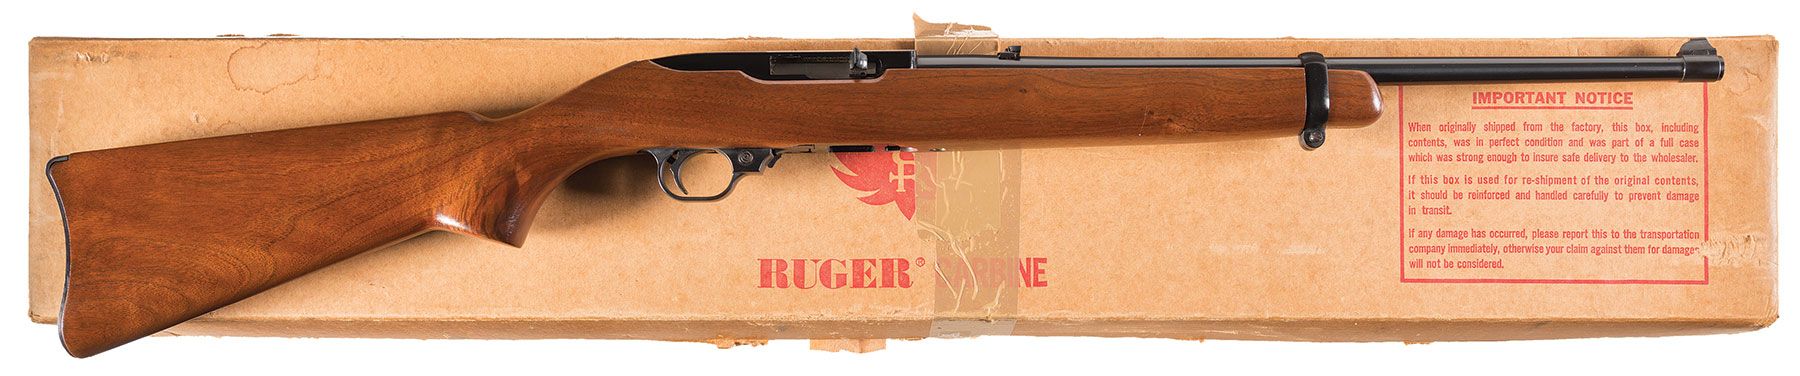 Ruger 22 Long Rifle Automatic Pistol Serial Numbers